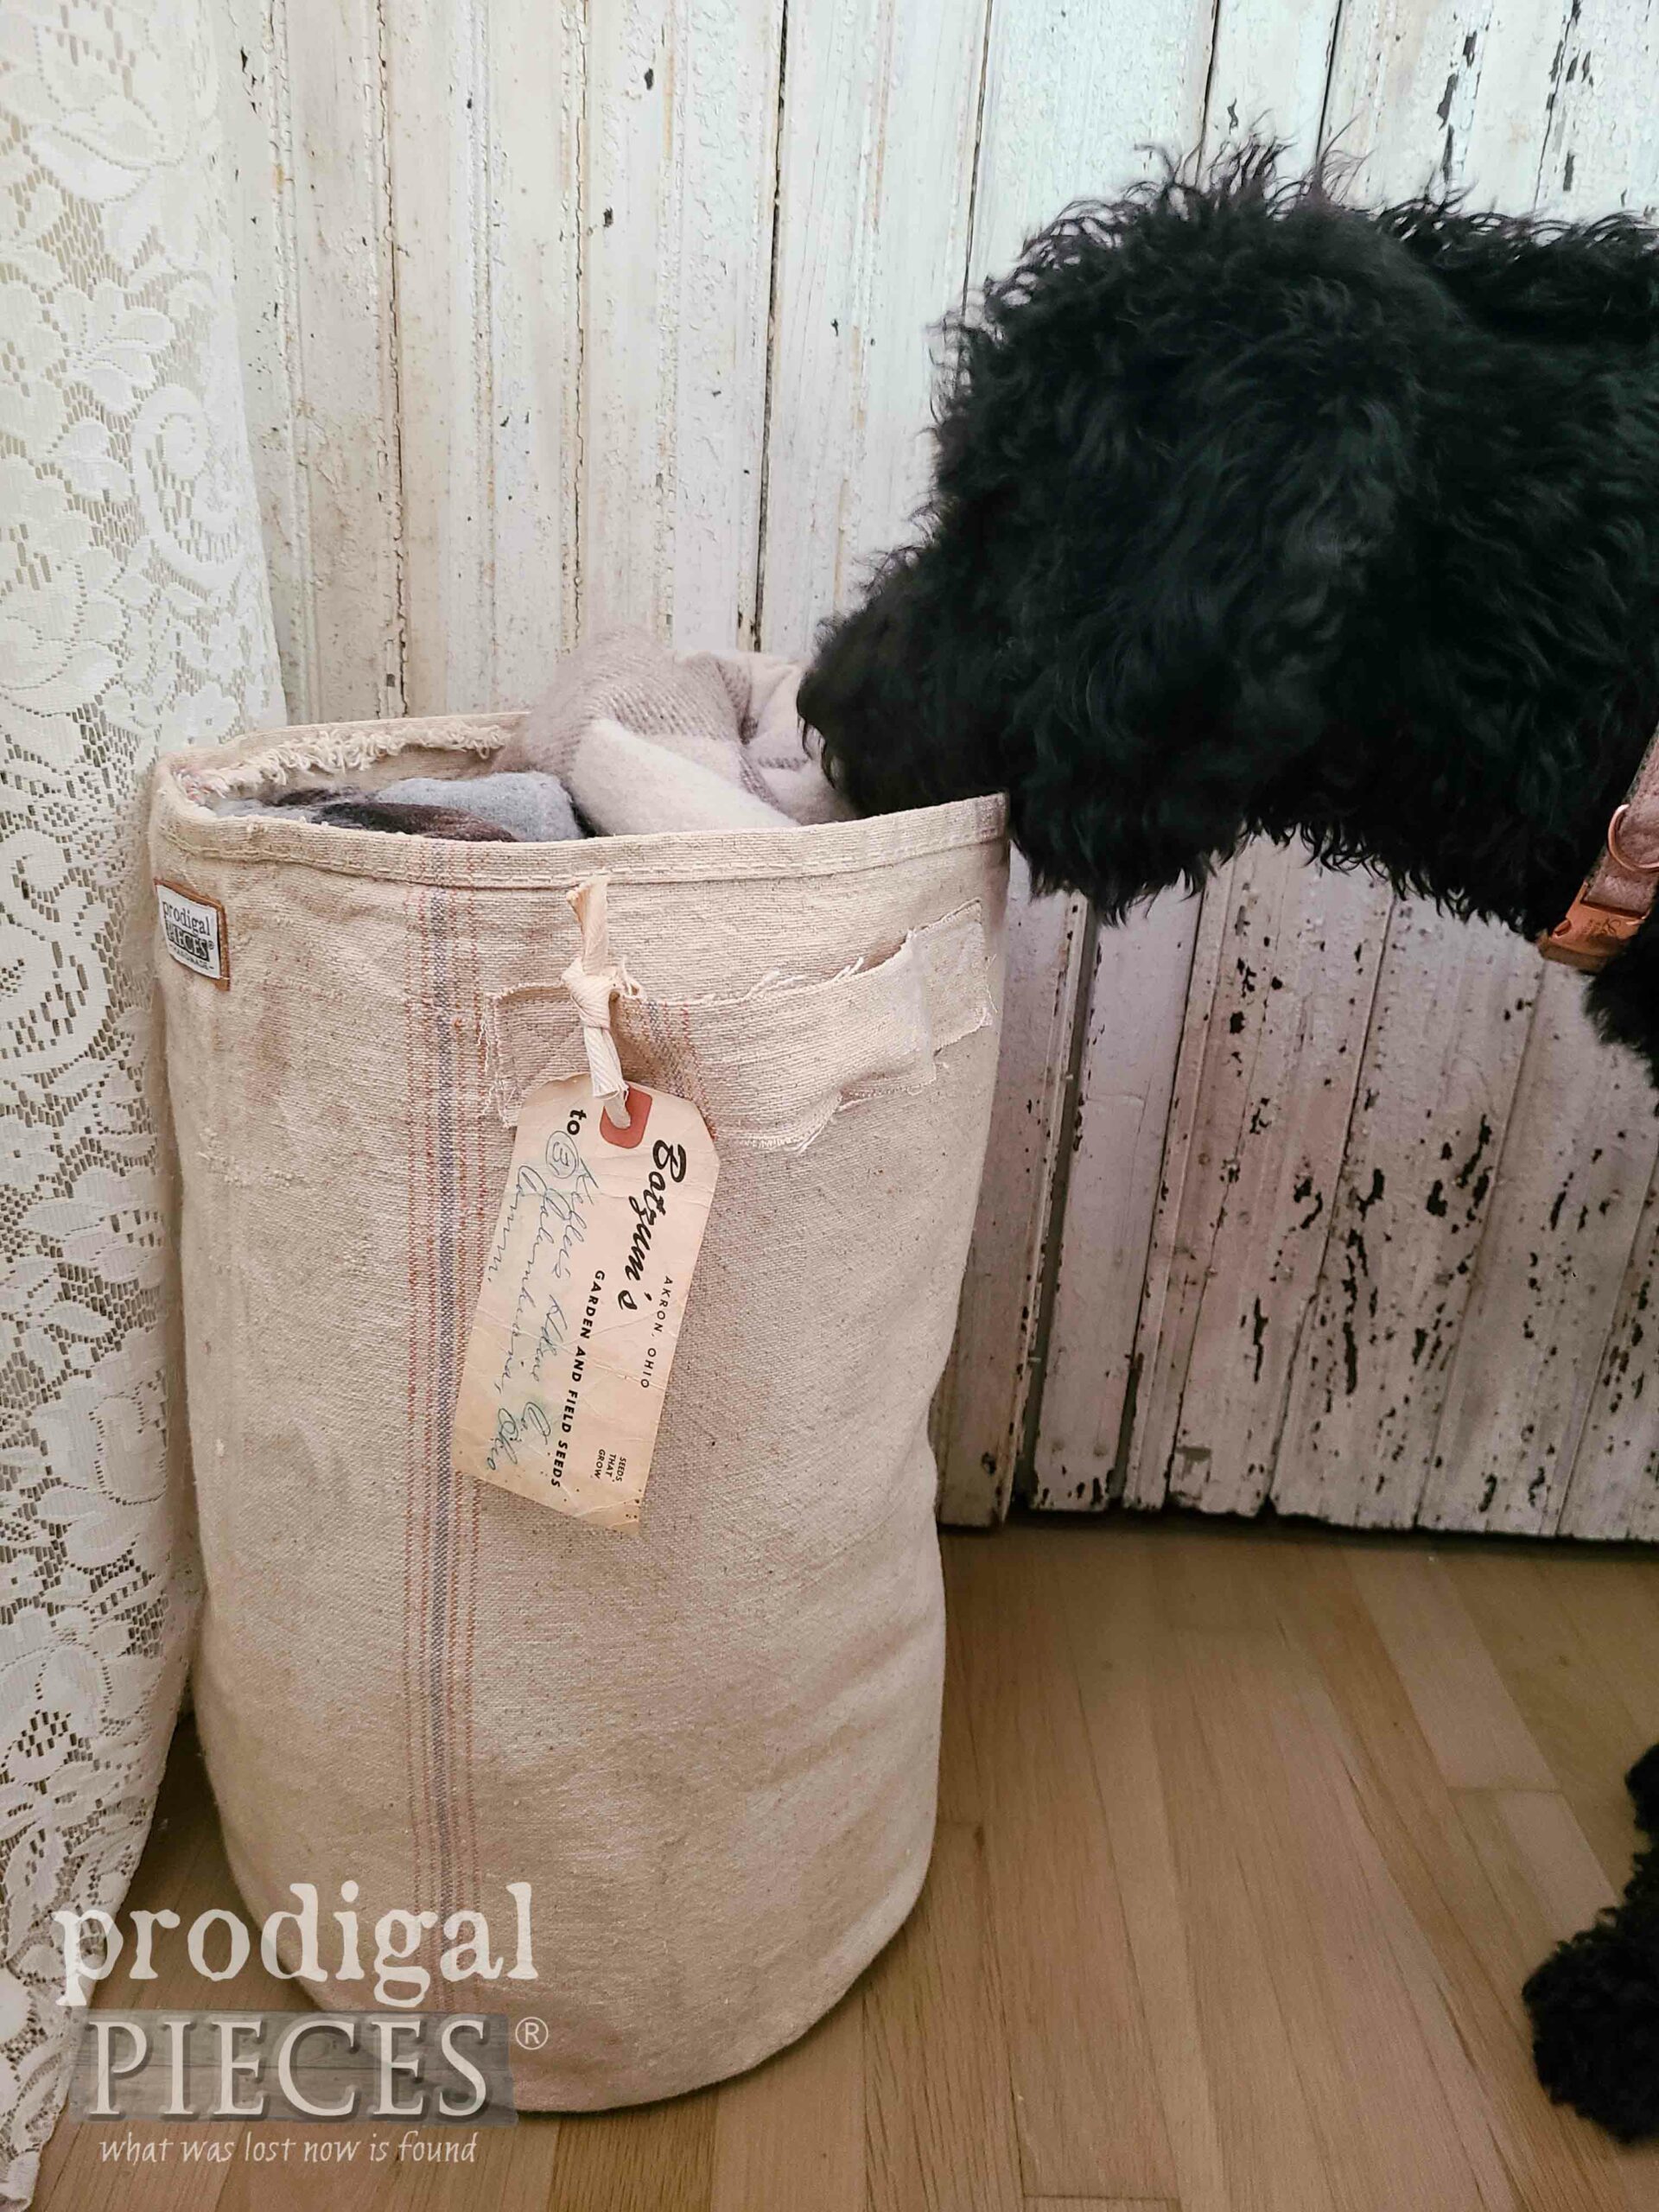 Goldendoodle Puppy Inspecting Feed Sack Bucket by Larissa Prodigal Pieces | prodigalpieces.com #prodigalpieces #upcycled #farmhouse #storage